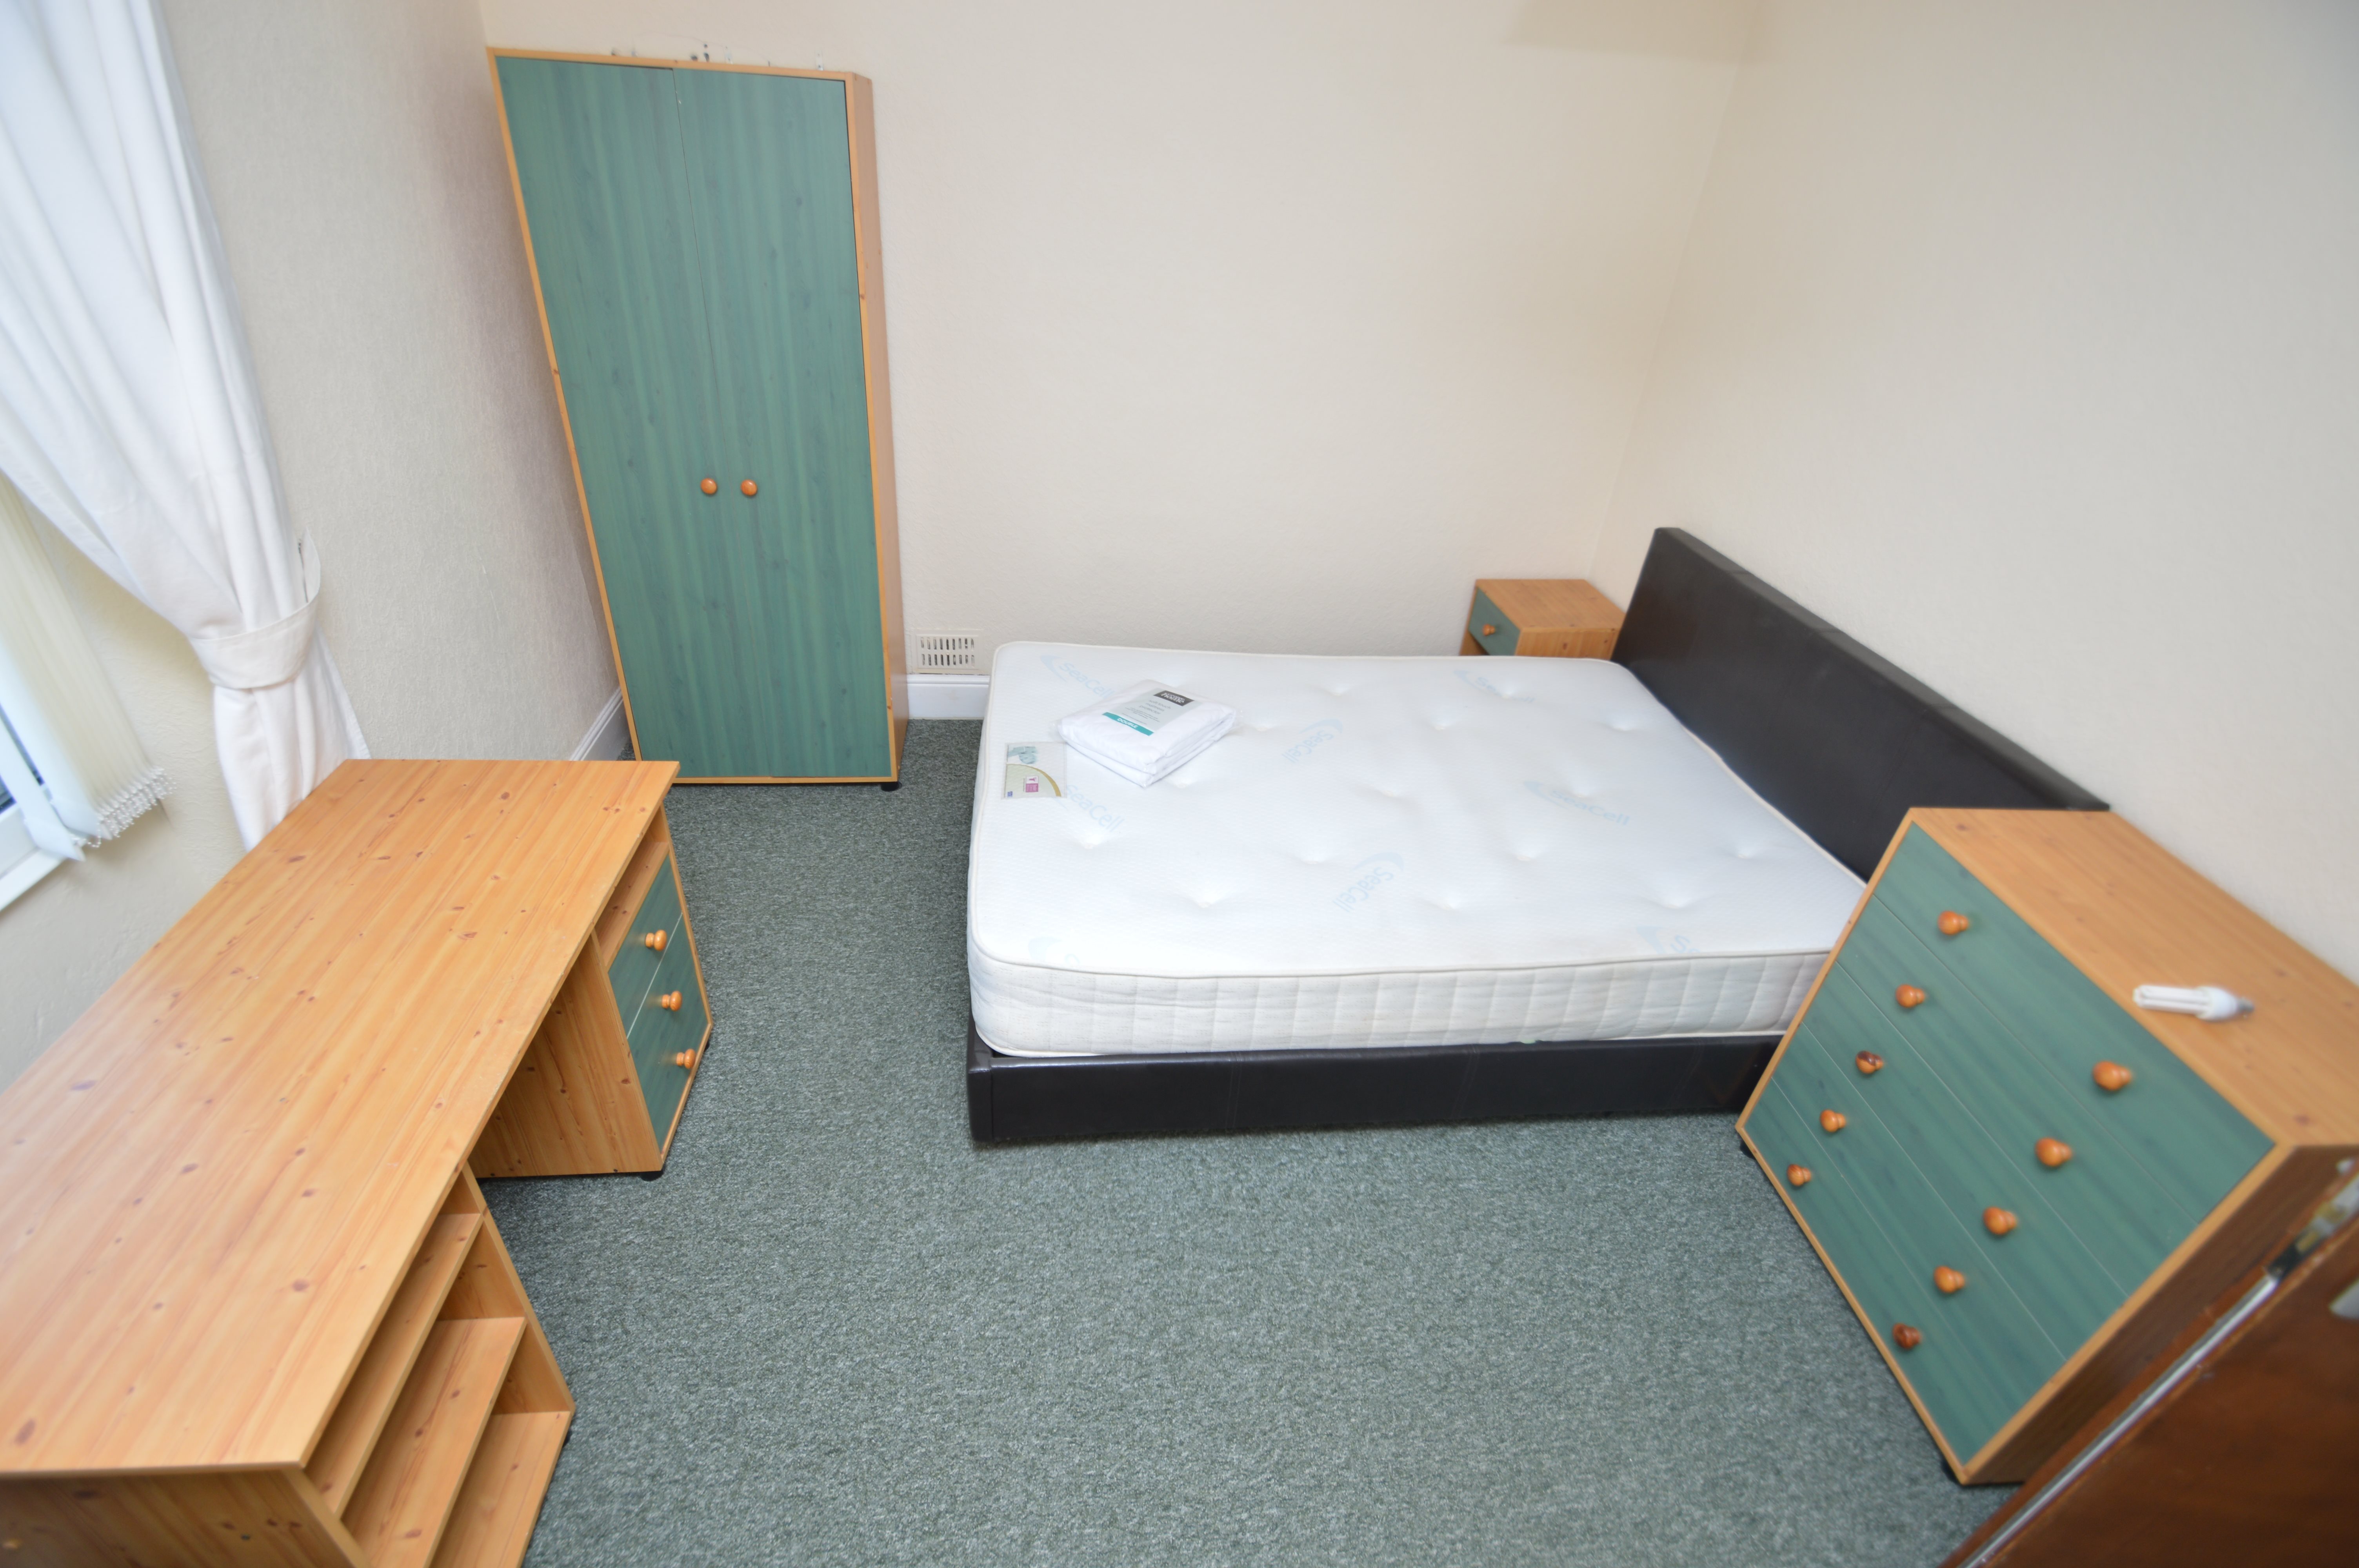 1 bed house / flat share to rent in Wood Road , Treforest  - Property Image 1